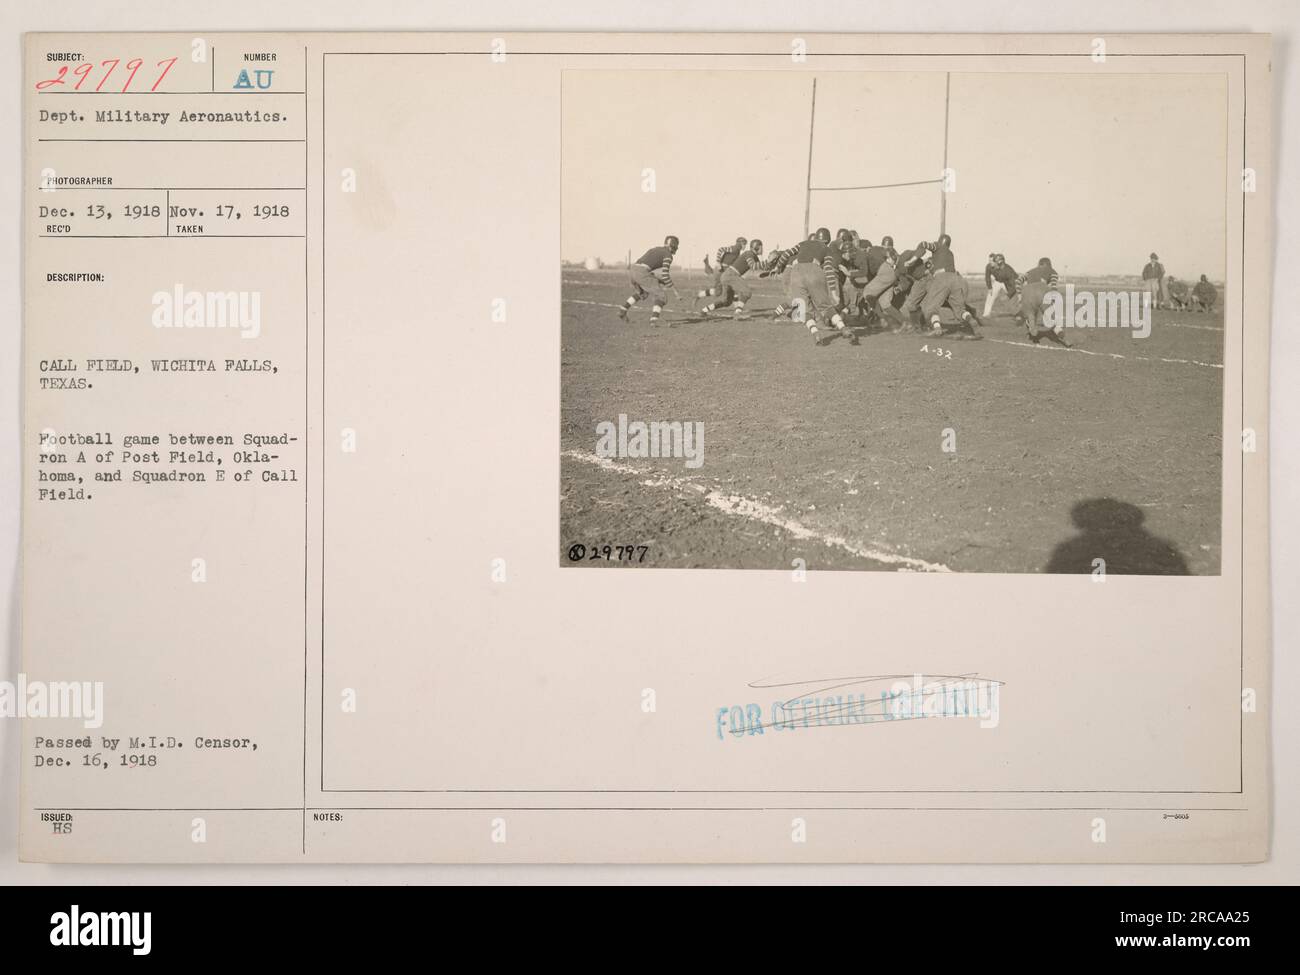 This photograph shows a football game between Squad-Iron A of Post Field, Oklahoma, and Squadron E of Call Field at Call Field, Wichita Falls, Texas. The image was taken on November 17, 1918, and was passed by the M.I.D. Censor on December 16, 1918. The photograph belongs to the AU Department of Military Aeronautics and is labeled as number 29797. Stock Photo